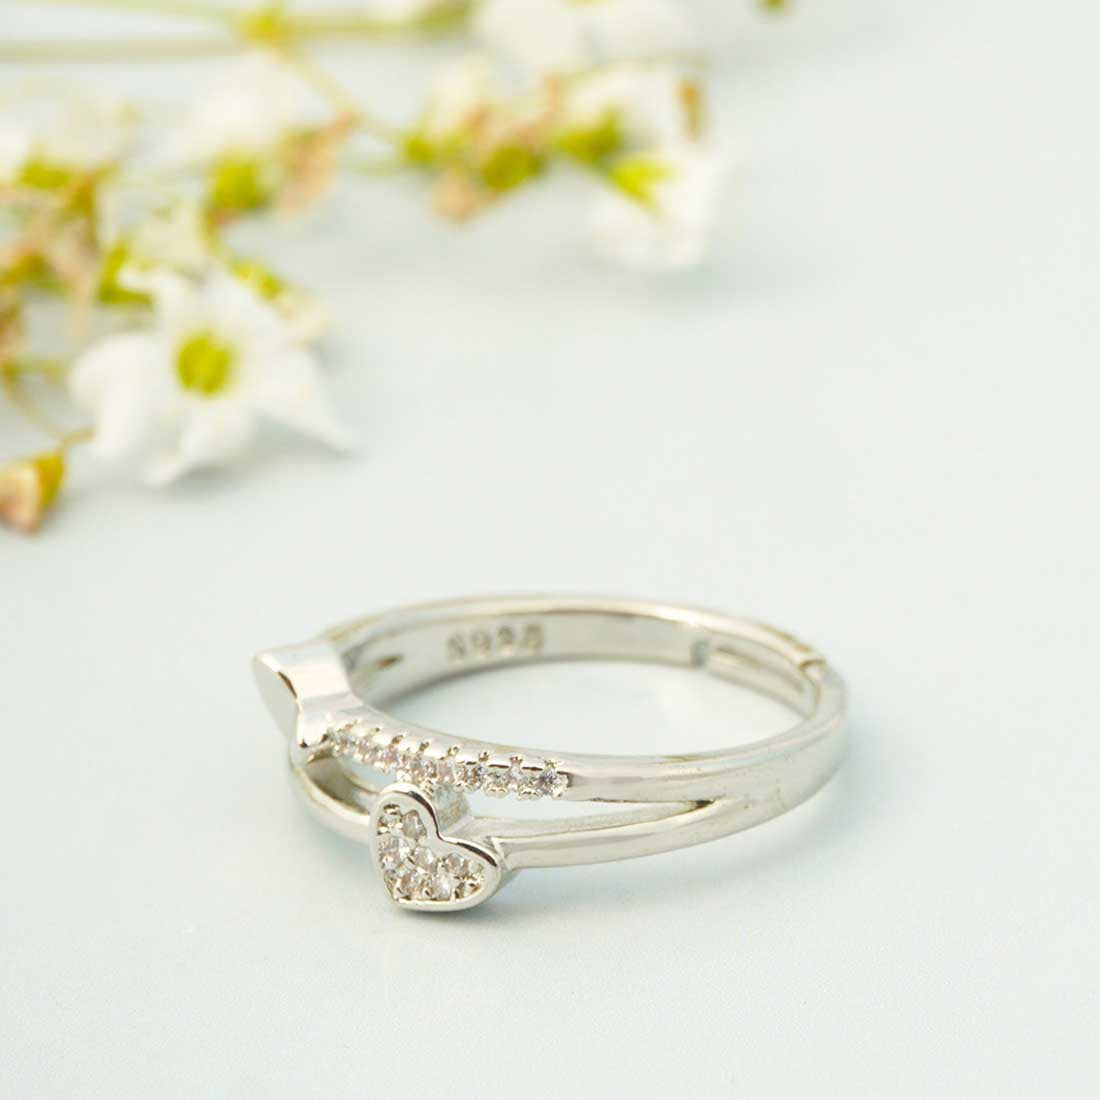 Silver-Plated Stone Studded Adjustable Finger Ring